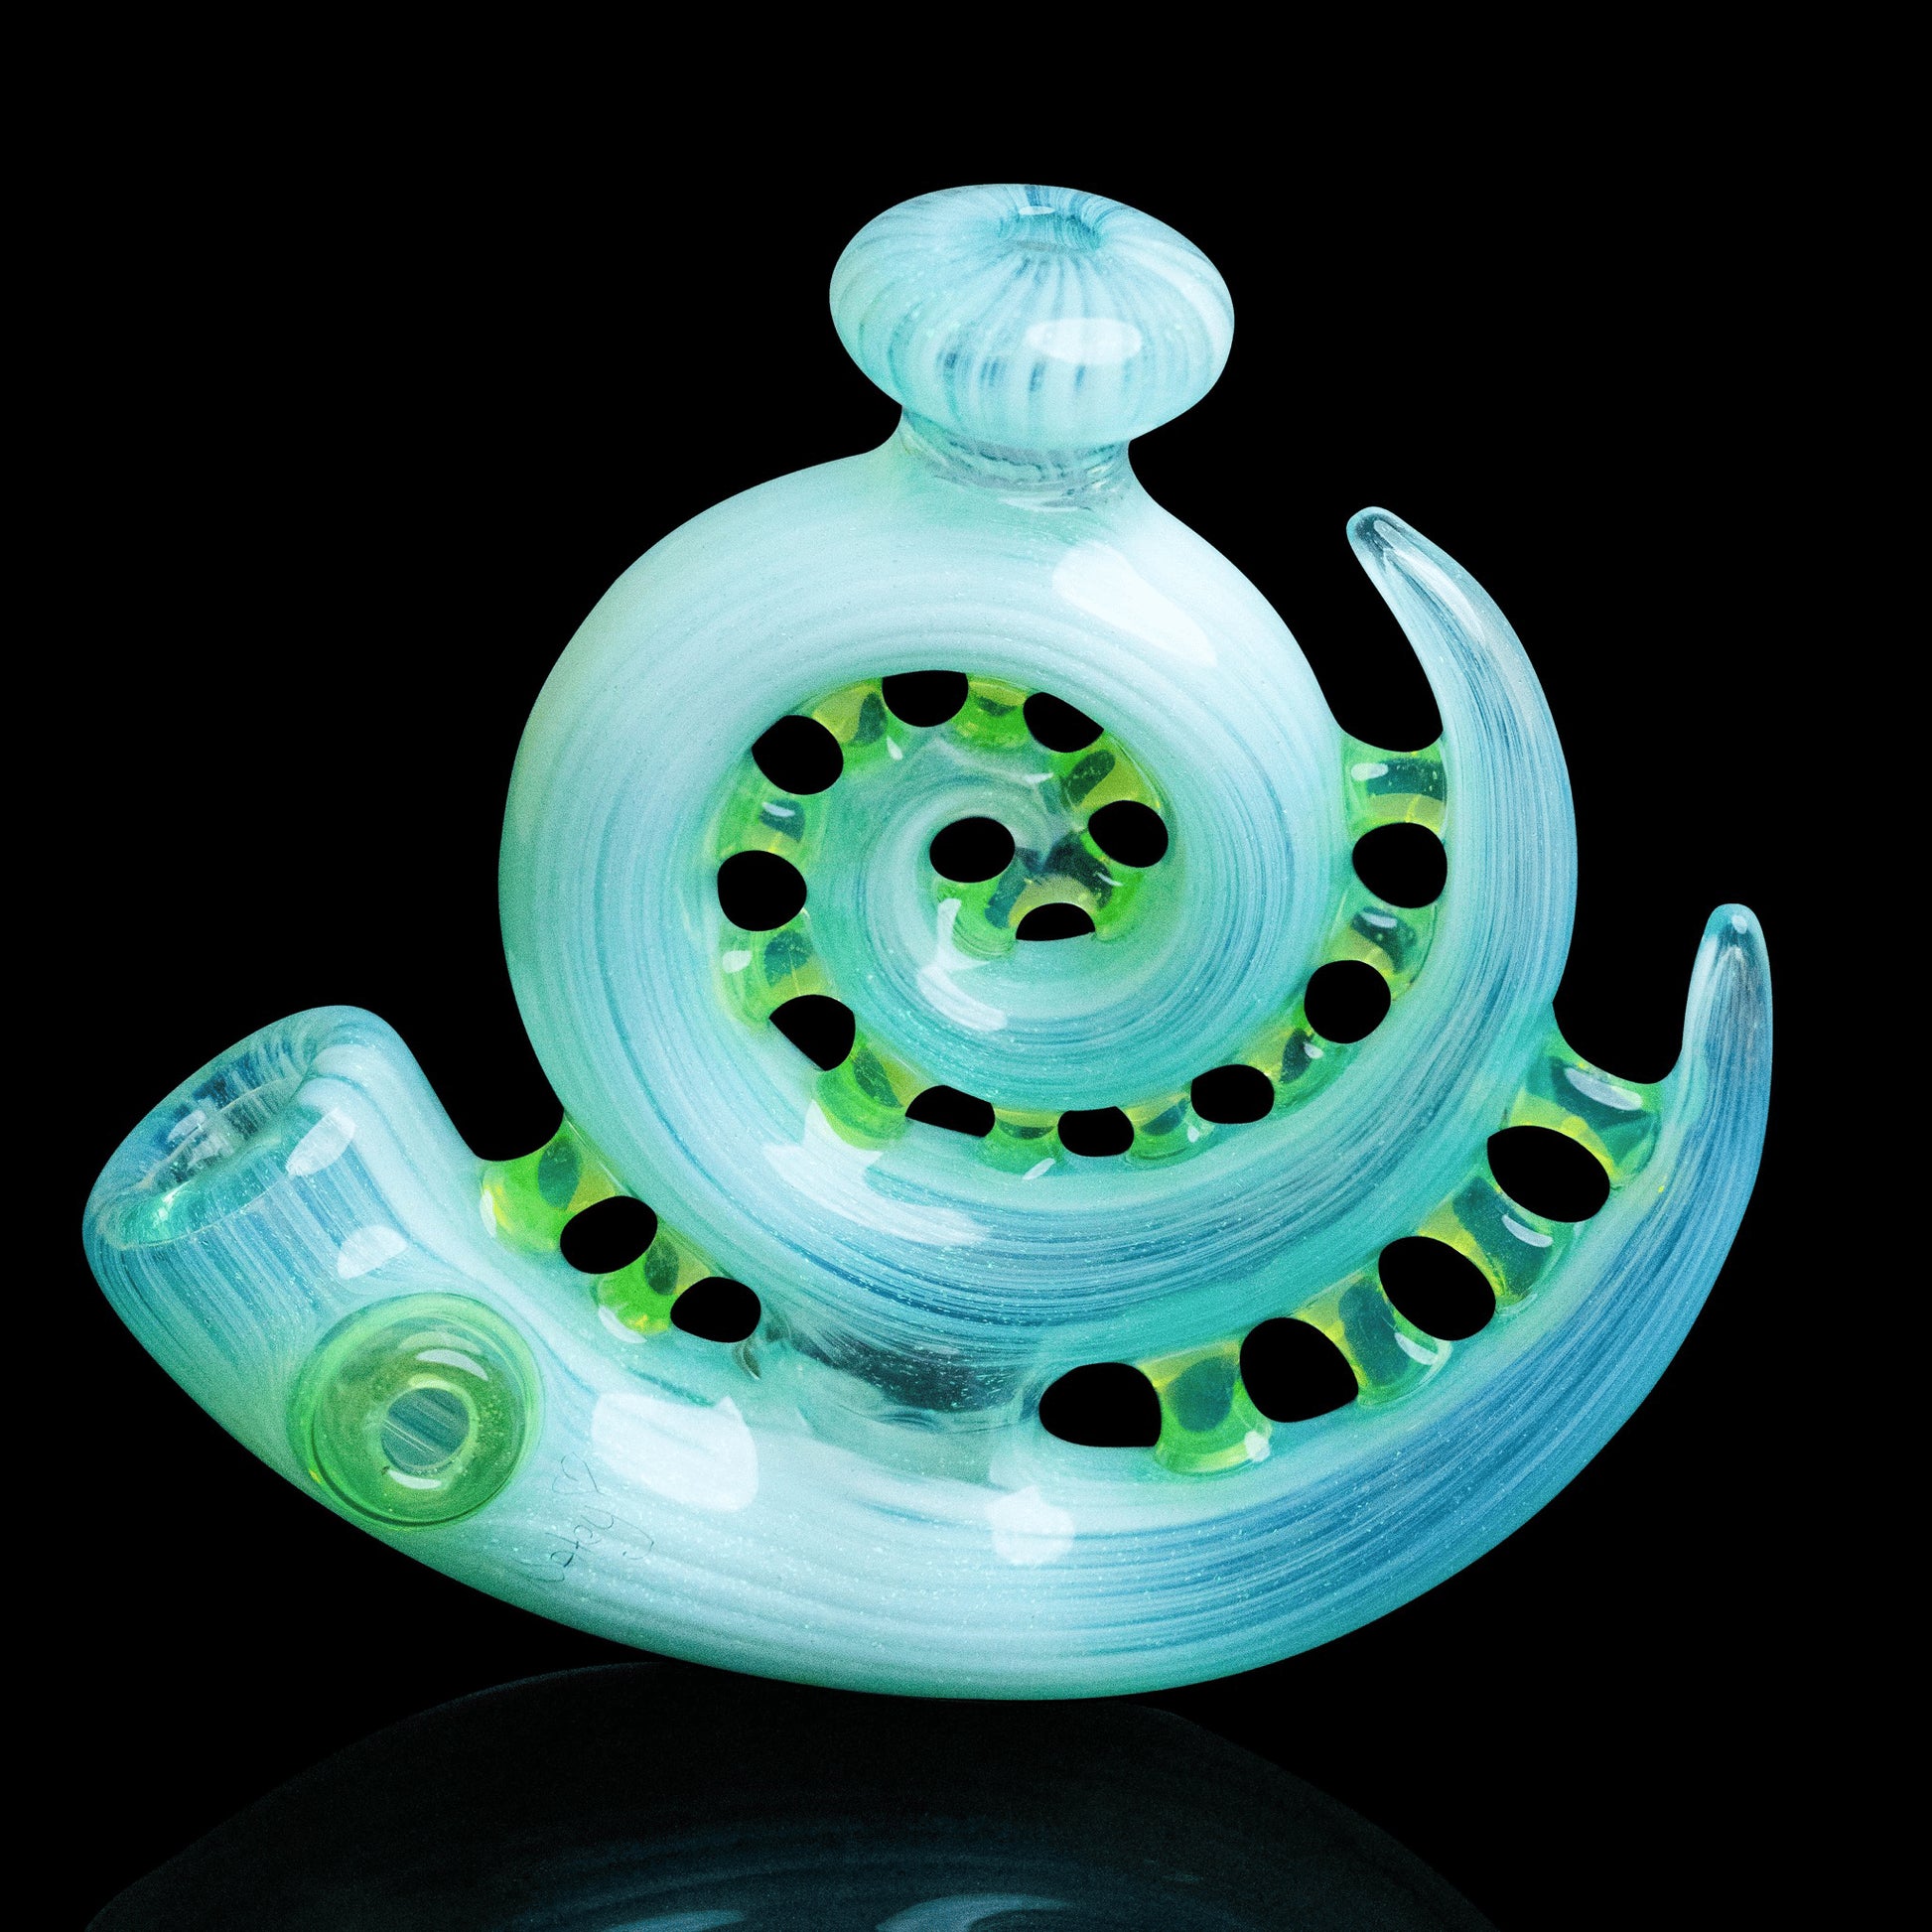 sophisticated design of the Nautilus Dry Pipe by NateyLove (2021)